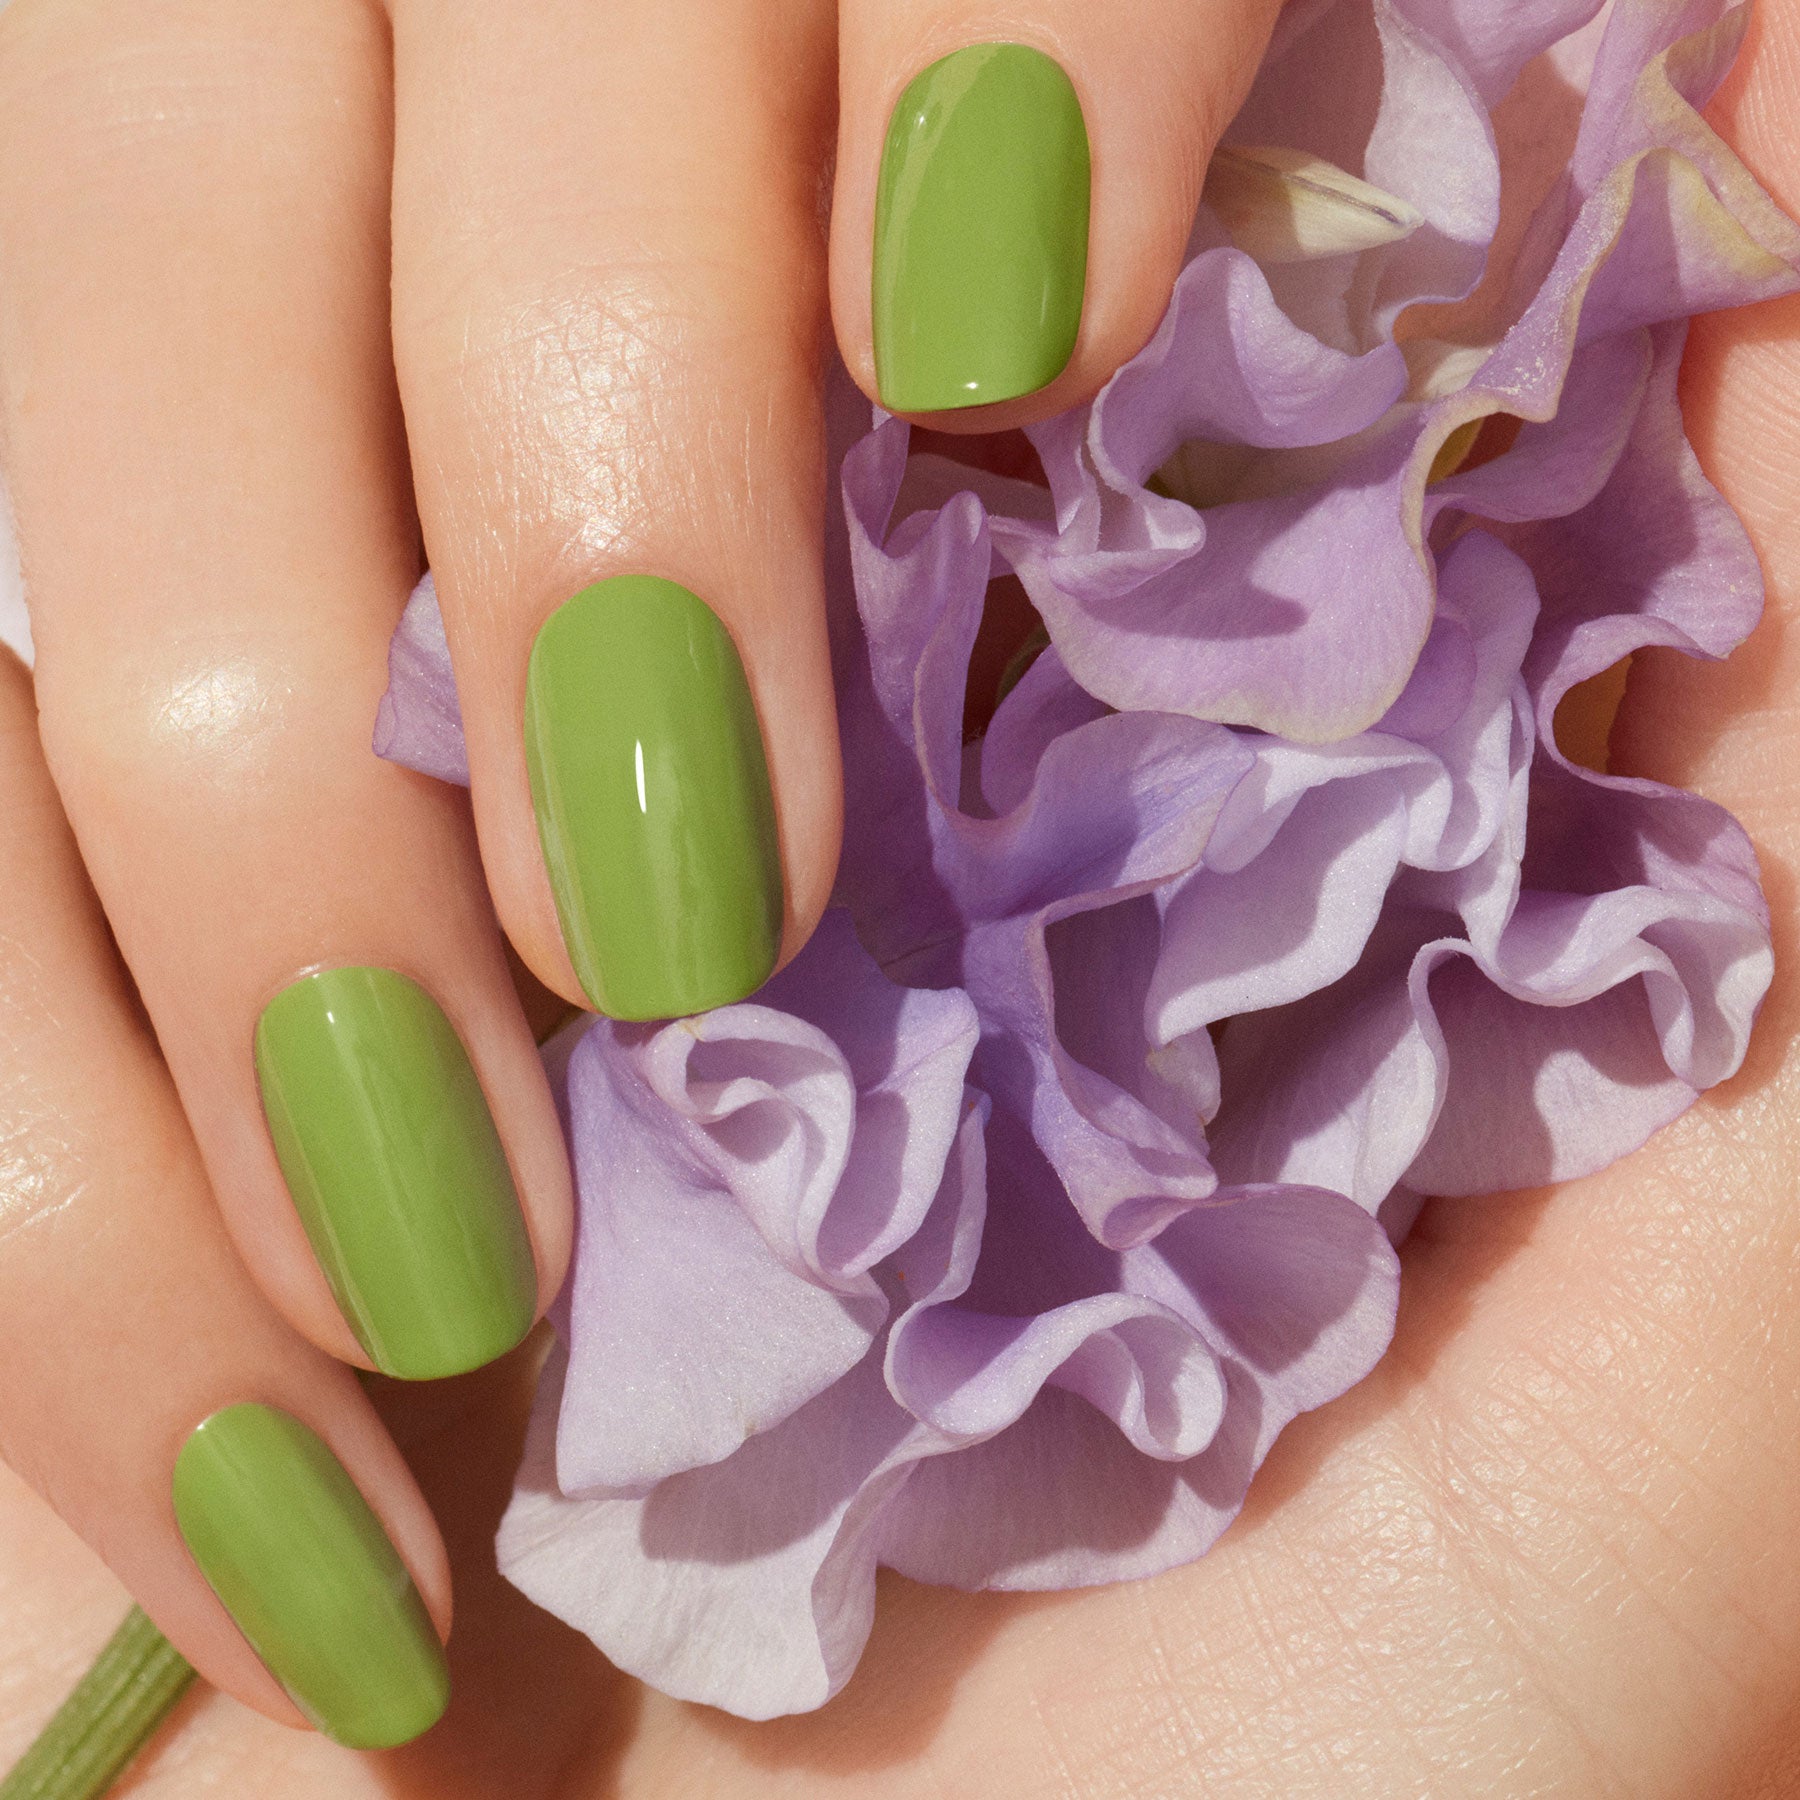 DeBelle Gel Nail Lacquer Fleur Pistachio Mint Green Nail Polish 8 ml Online  in India, Buy at Best Price from Firstcry.com - 12696331